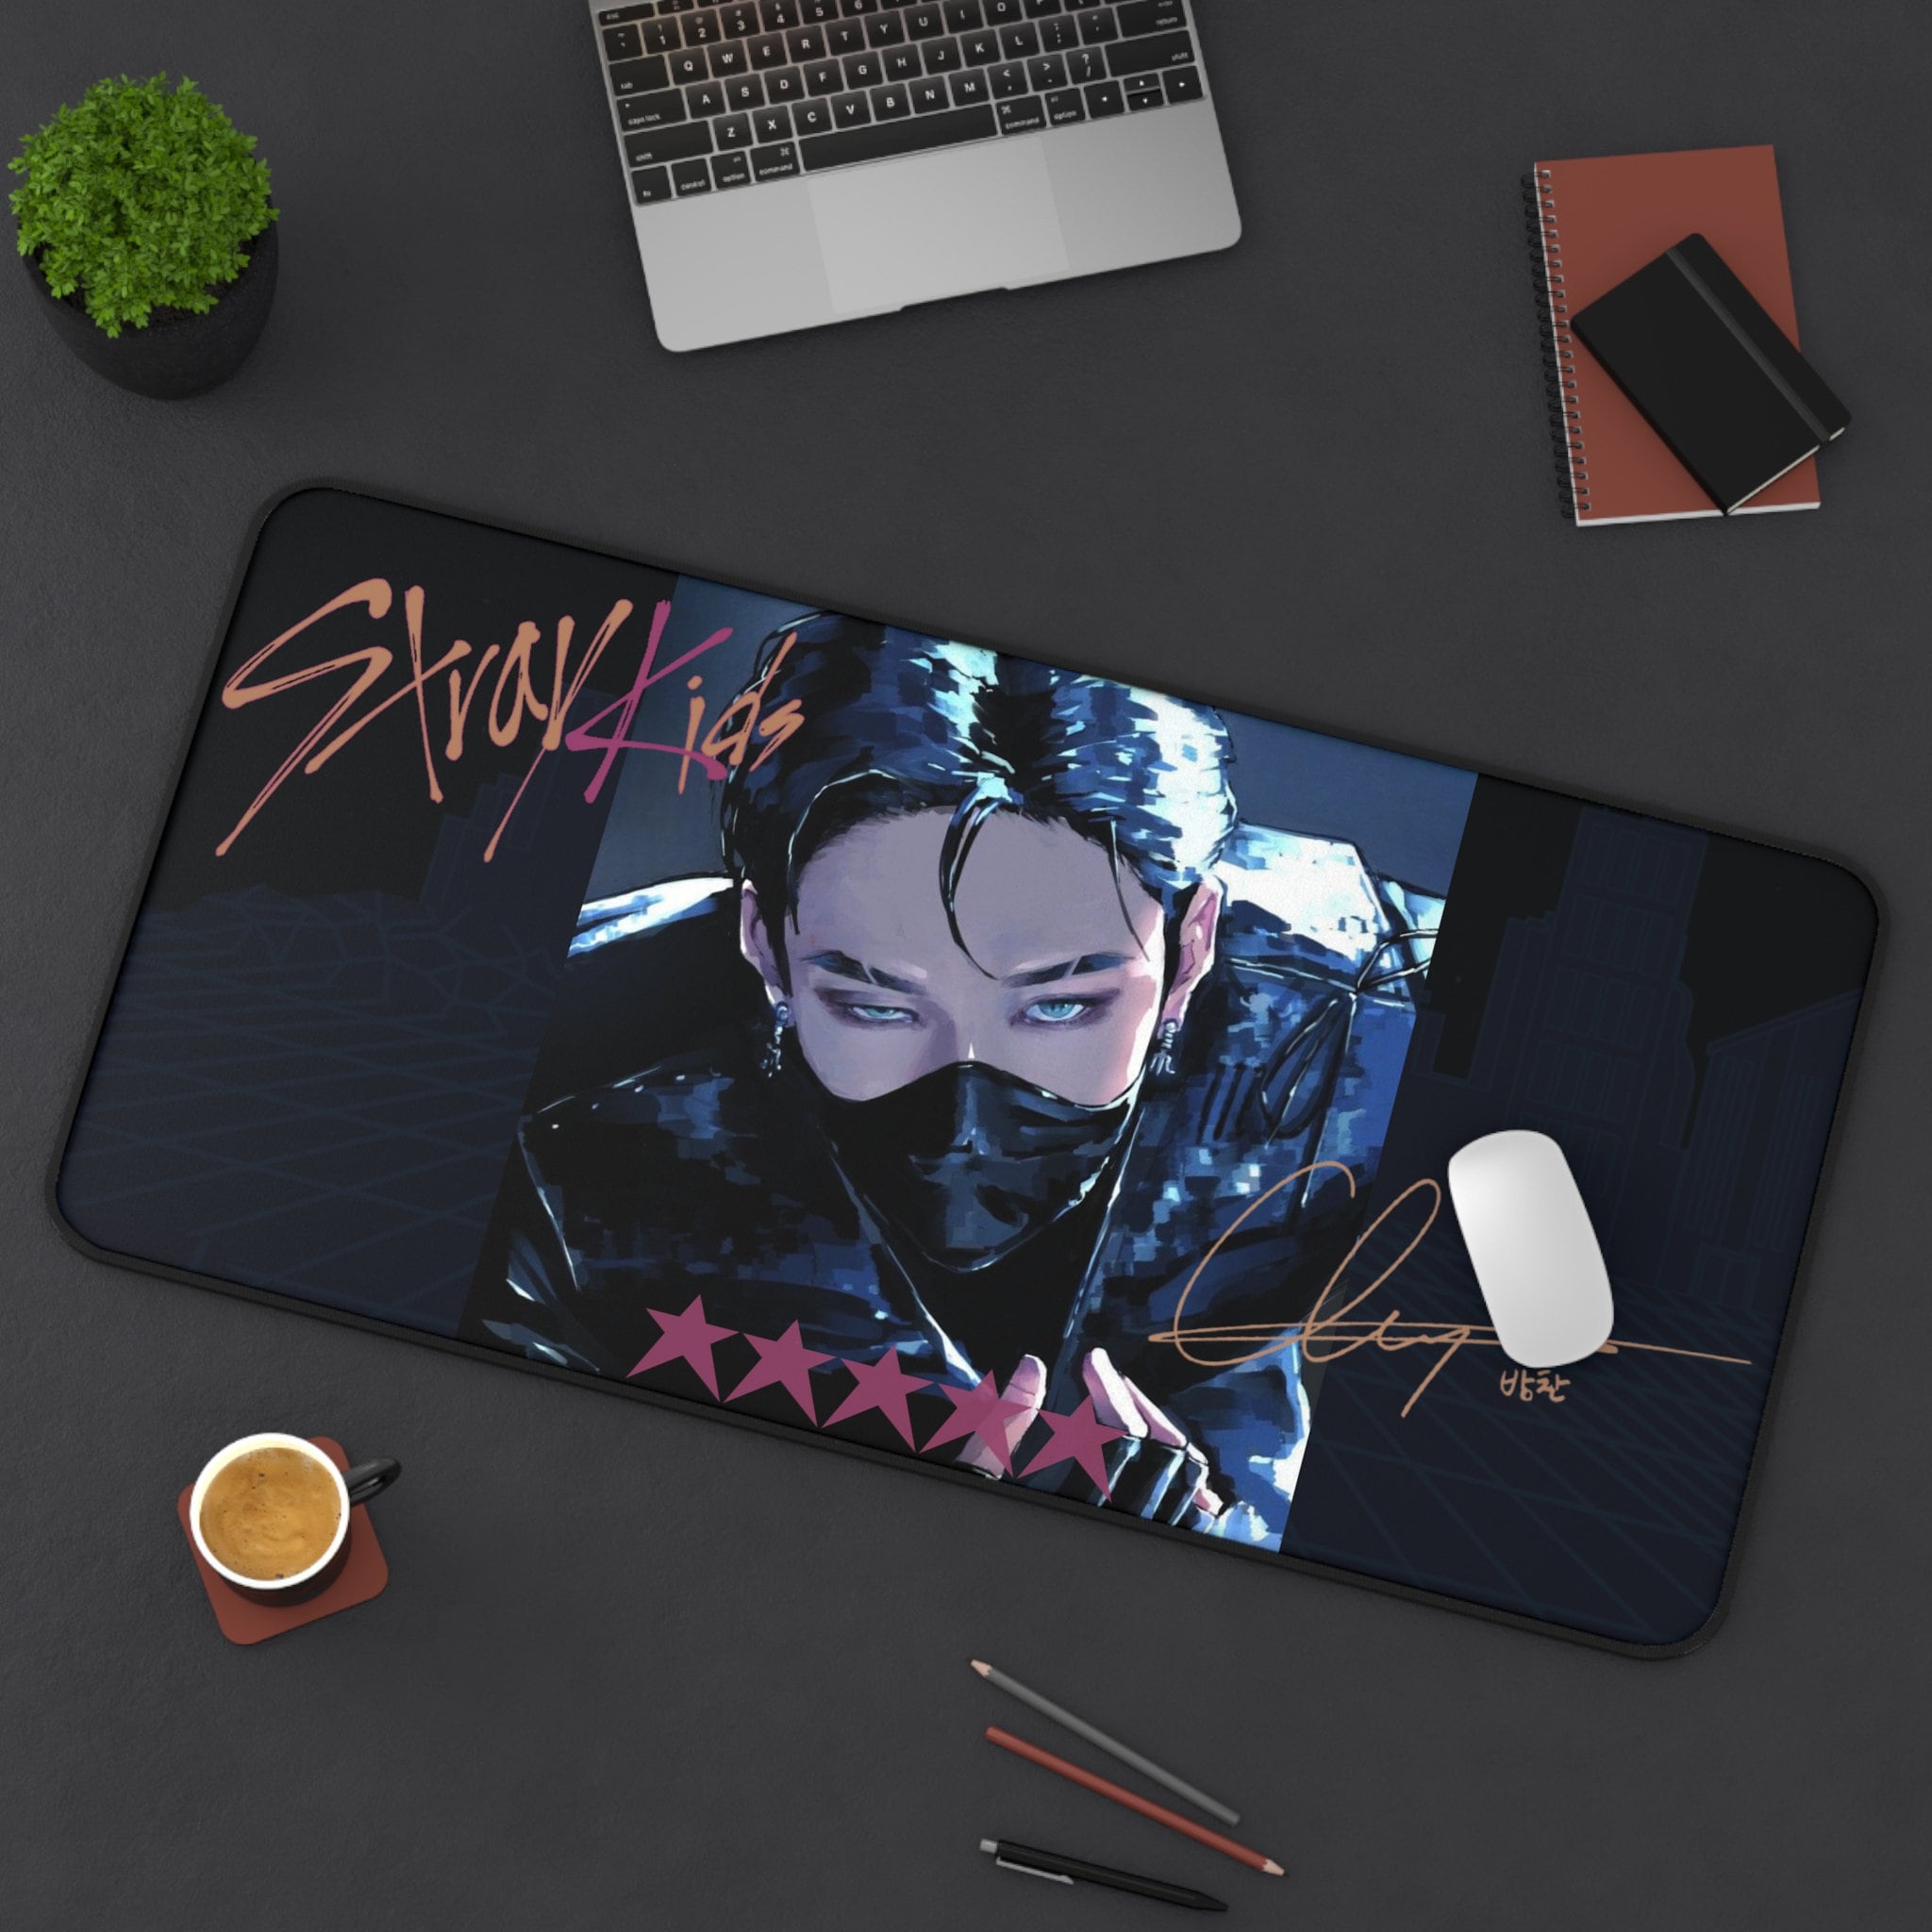 Stray Cat Game Cyberpunk  Mouse Pad for Sale by MarinaLexaArt